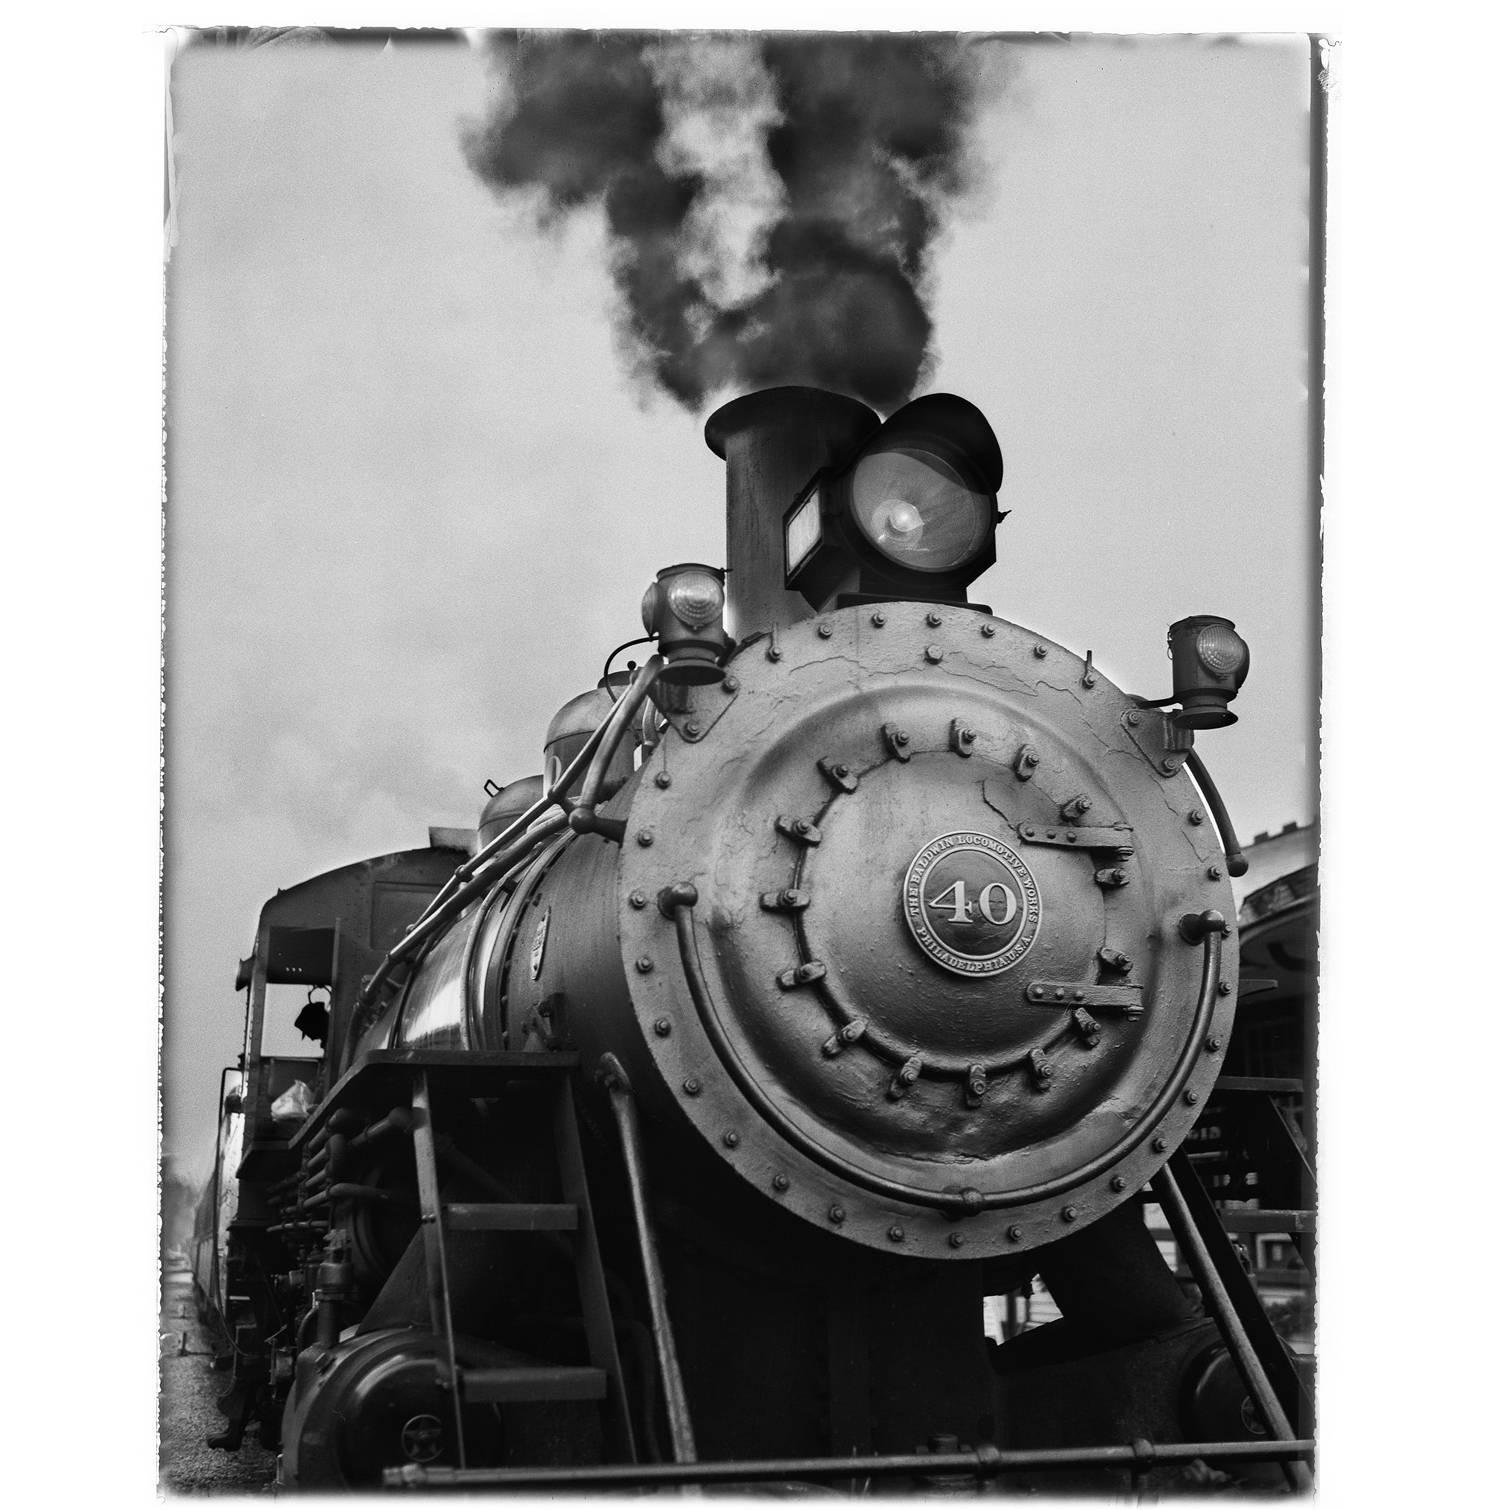 Train Photograph by Charles Baker For Sale